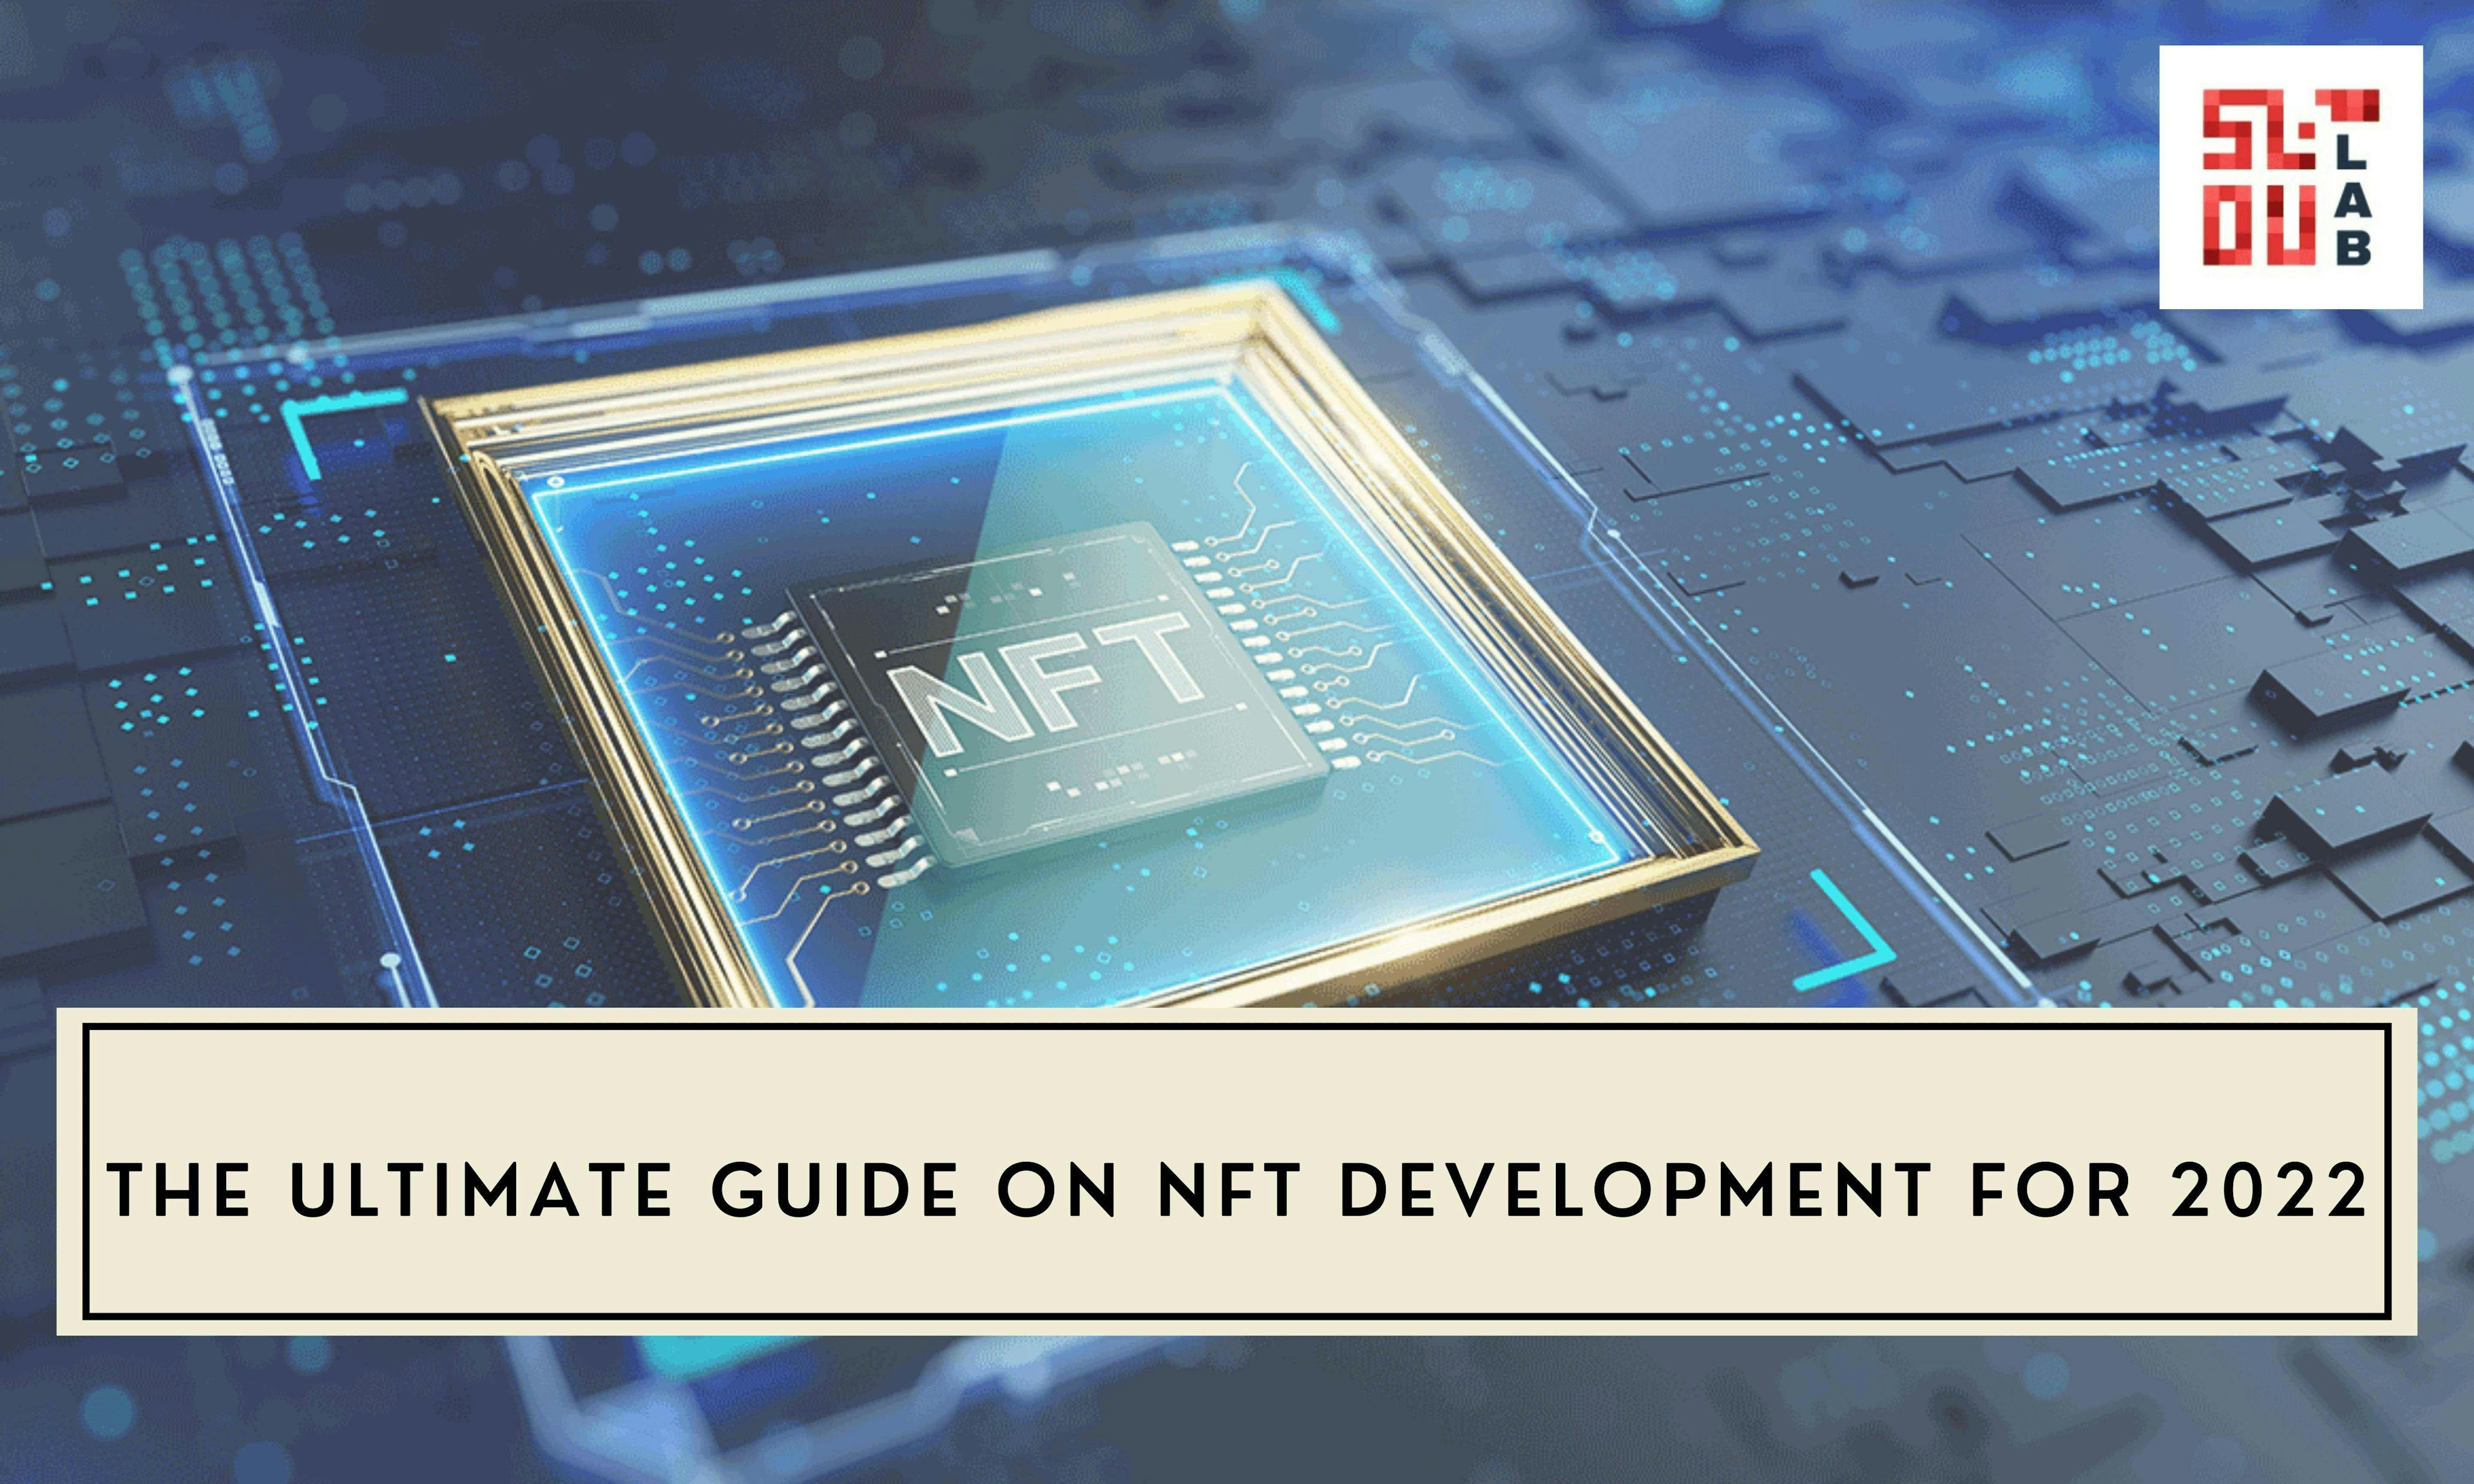 The Ultimate Guide on NFT Development for 2022